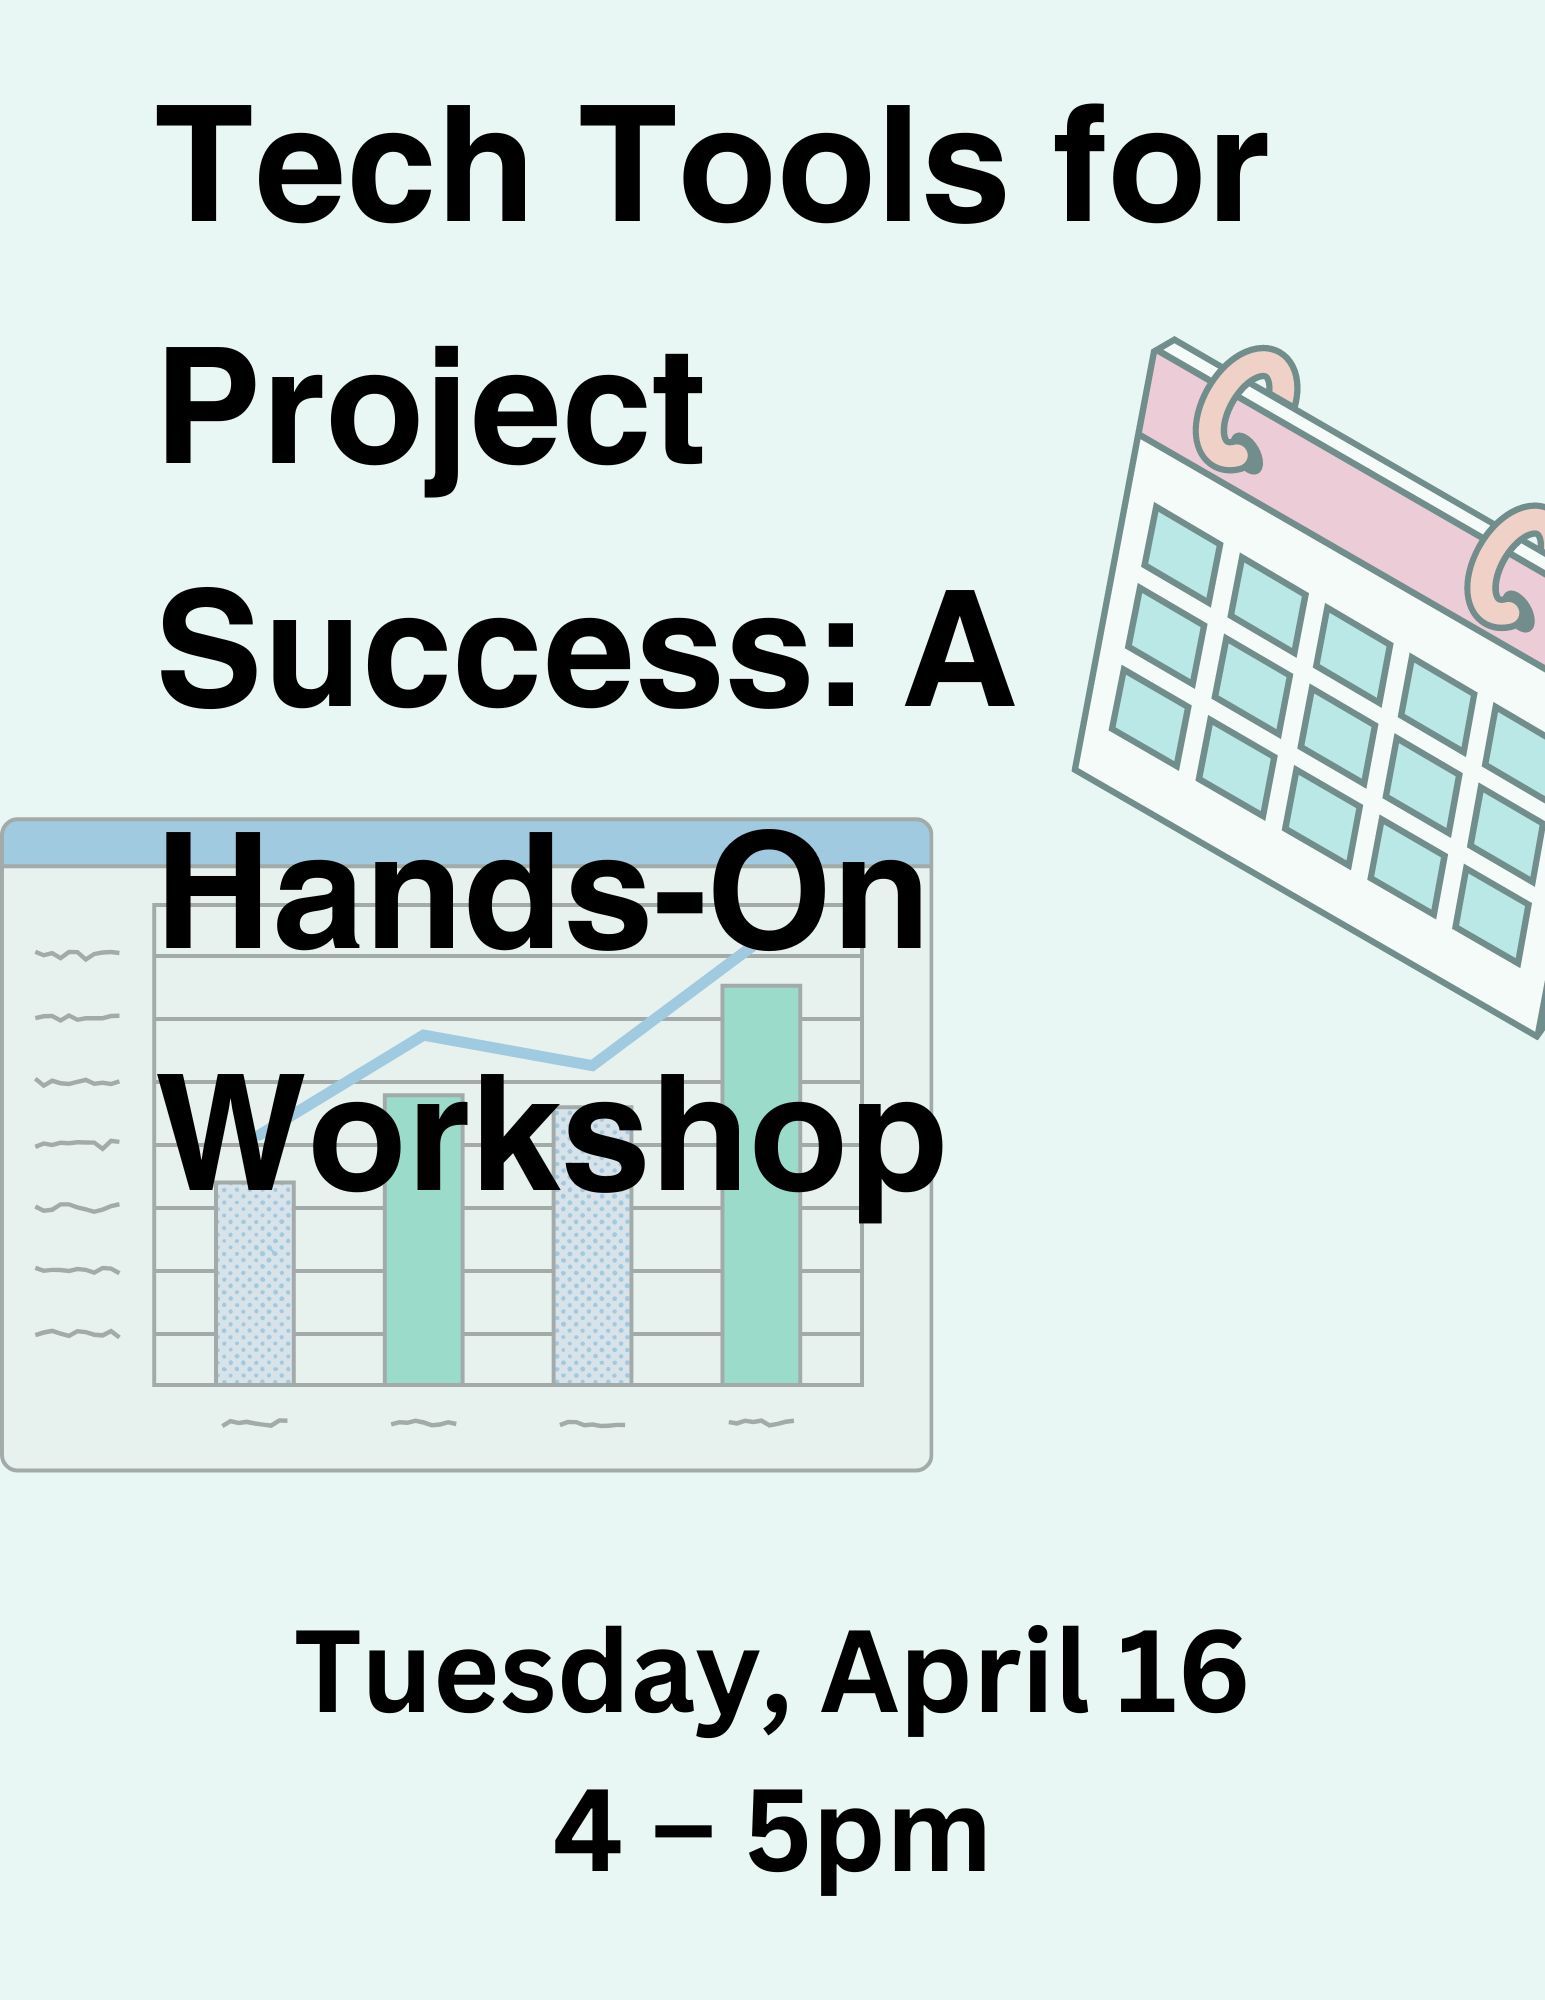 Learn Excel & Spreadsheets: Tech Tools for Project Success: A Hands-On Workshop on Spreadsheets